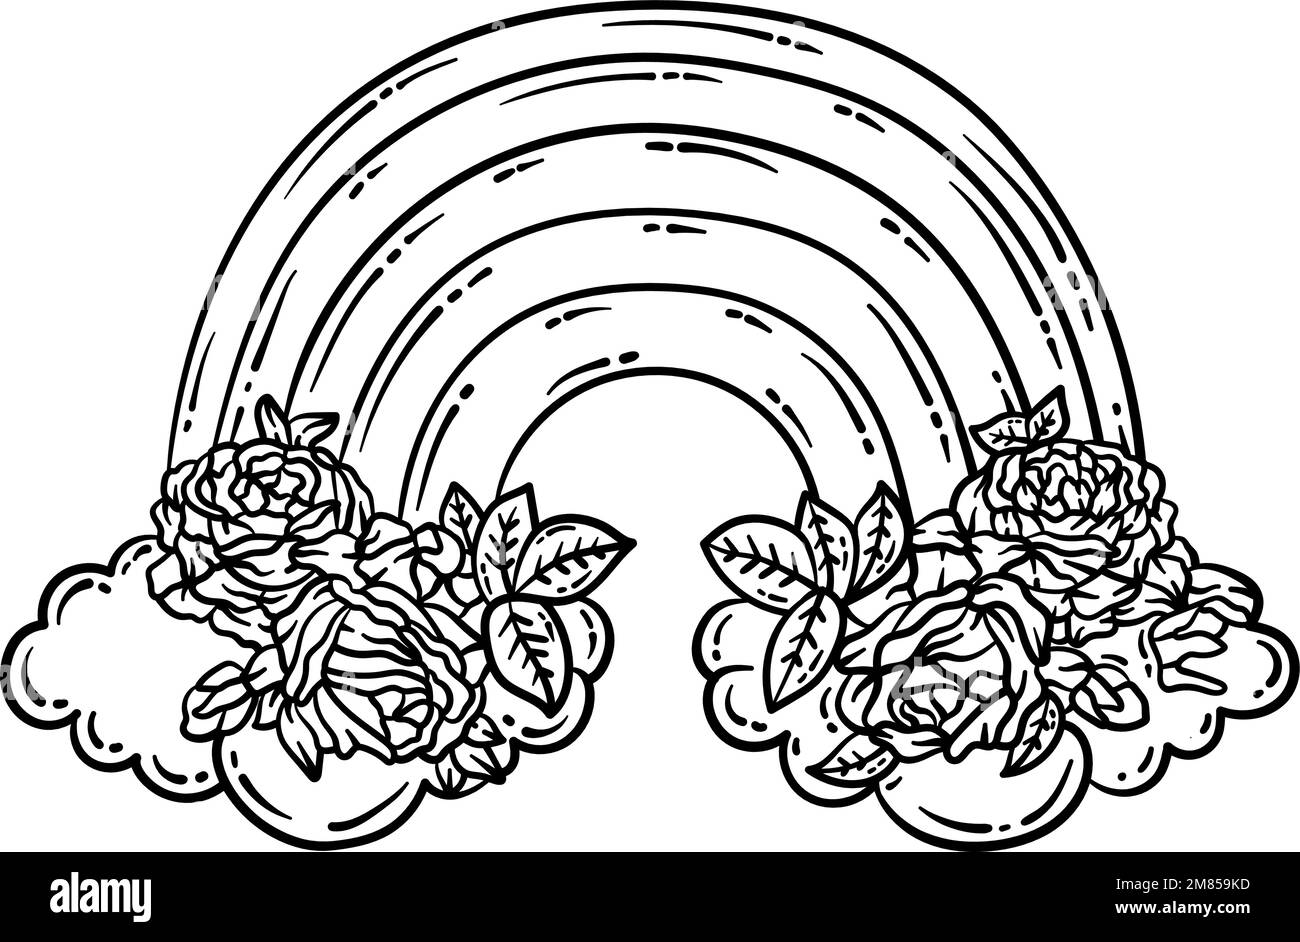 Coloring Pages Of Rainbows And Flowers